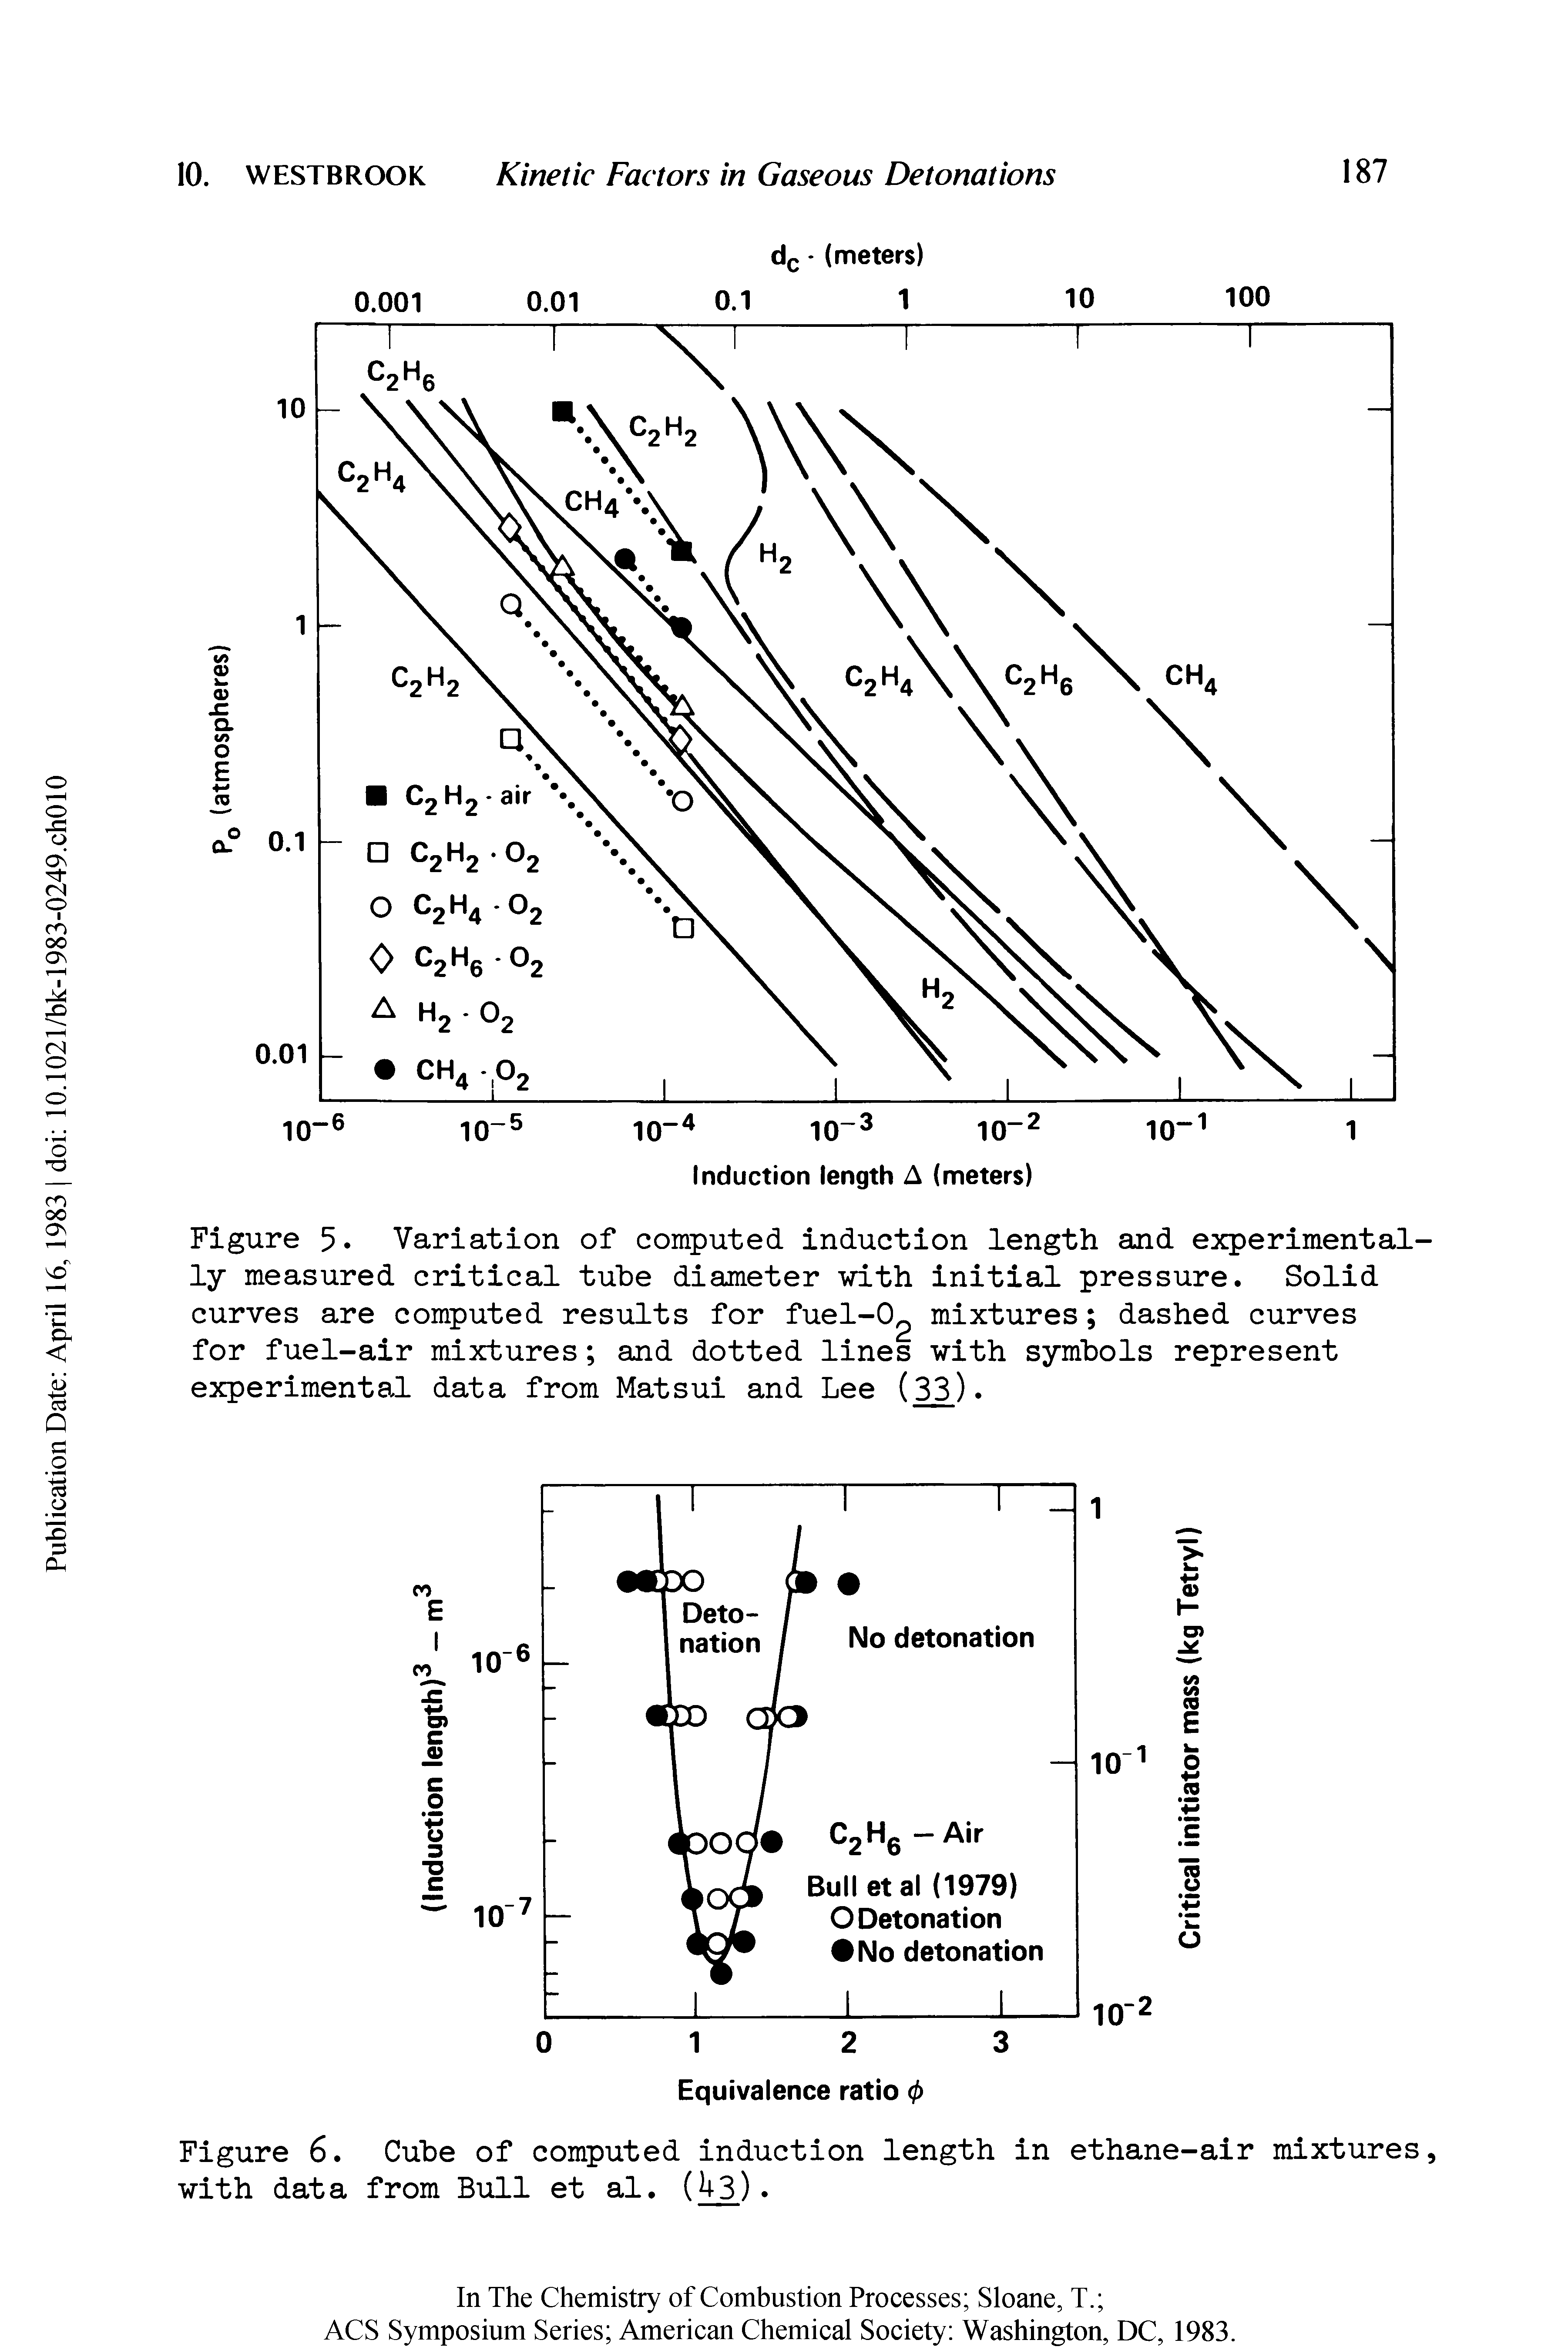 Figure 5 Variation of computed induction length and experimentally measured critical tube diameter with initial pressure. Solid curves are computed results for fuel-O mixtures dashed curves for fuel-air mixtures and dotted lines with symbols represent experimental data from Matsui and Lee (33).